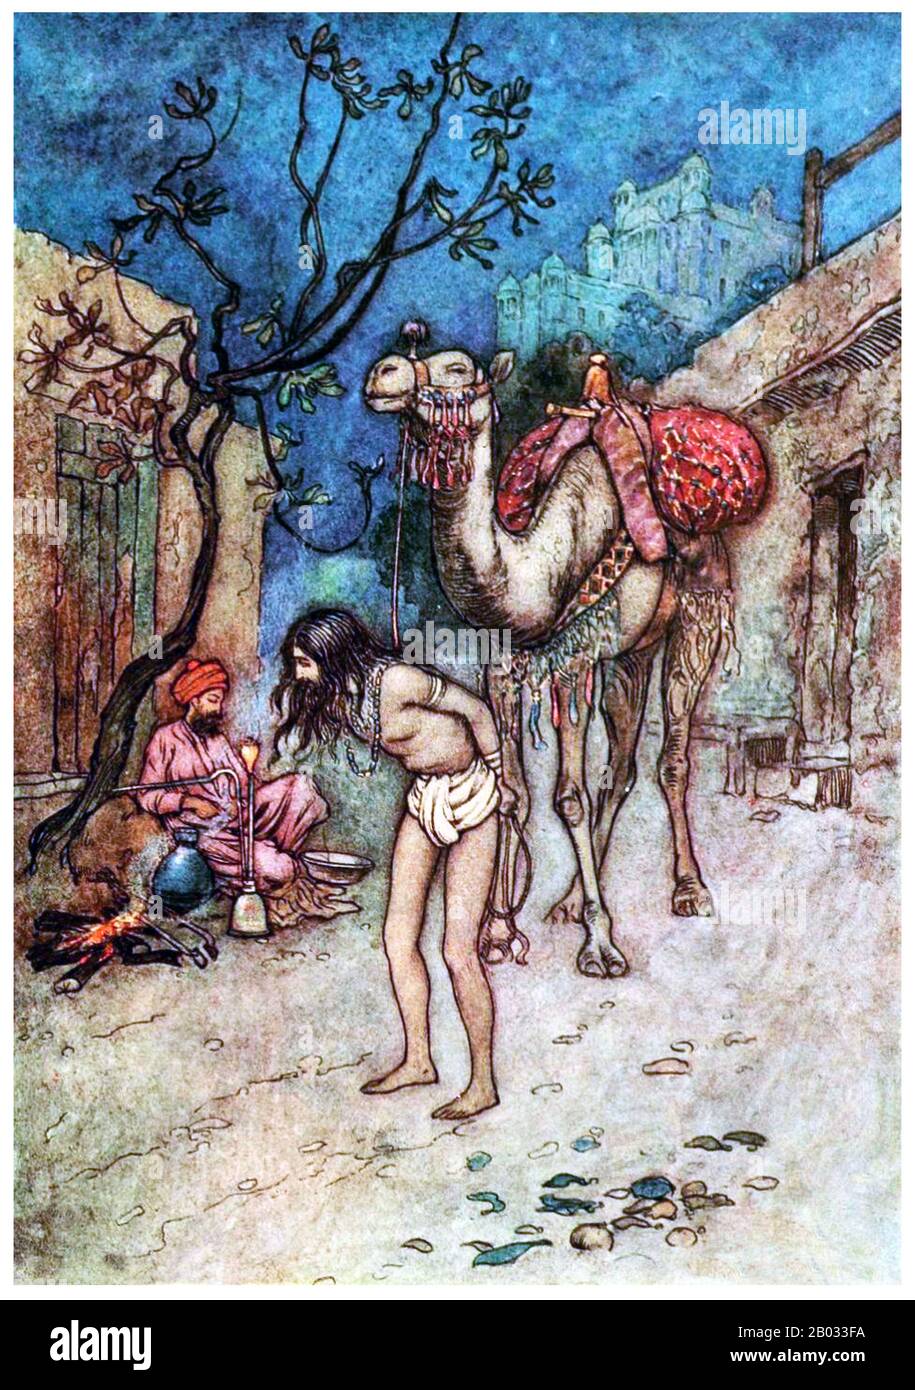 Warwick Goble (22 November 1862 – 22 January 1943) was an illustrator of children's books. He specialized in Orientalist and Indian themes.  Goble was born in Dalston, north London, the son of a commercial traveller, and educated and trained at the City of London School and the Westminster School of Art. He worked for a printer specializing in chromolithography and contributed to the Pall Mall Gazette and the Westminster Gazette.  In 1909, he became resident gift book illustrator for MacMillan and produced illustrations for The Water Babies, Green Willow, and Other Japanese Fairy Tales, The Co Stock Photo